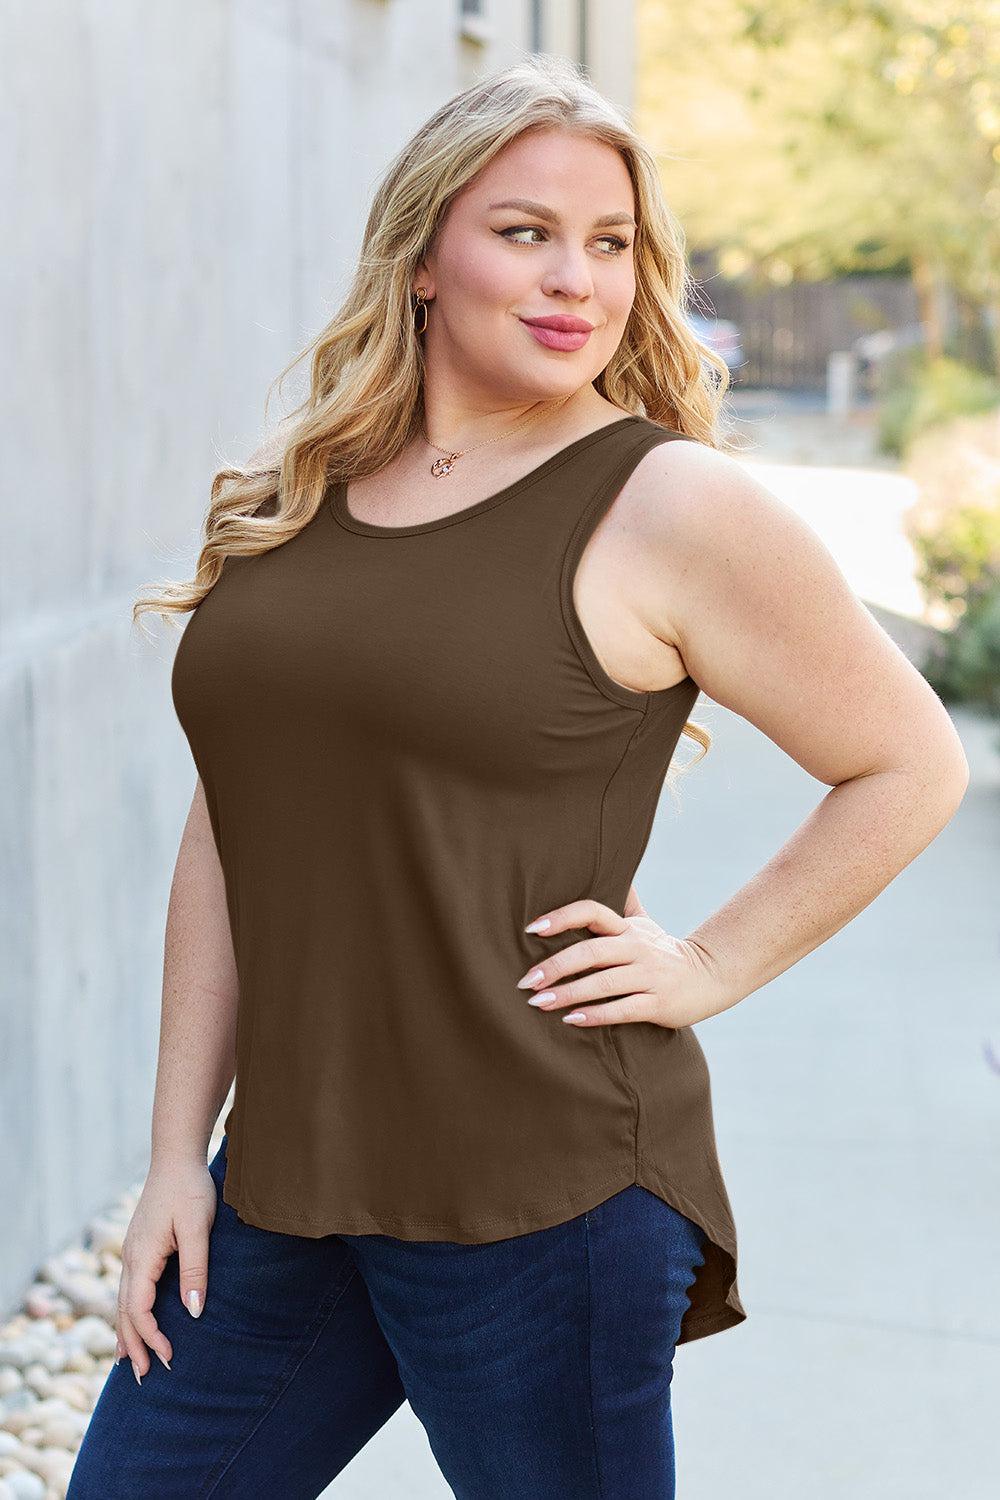 a woman in a brown top posing for a picture